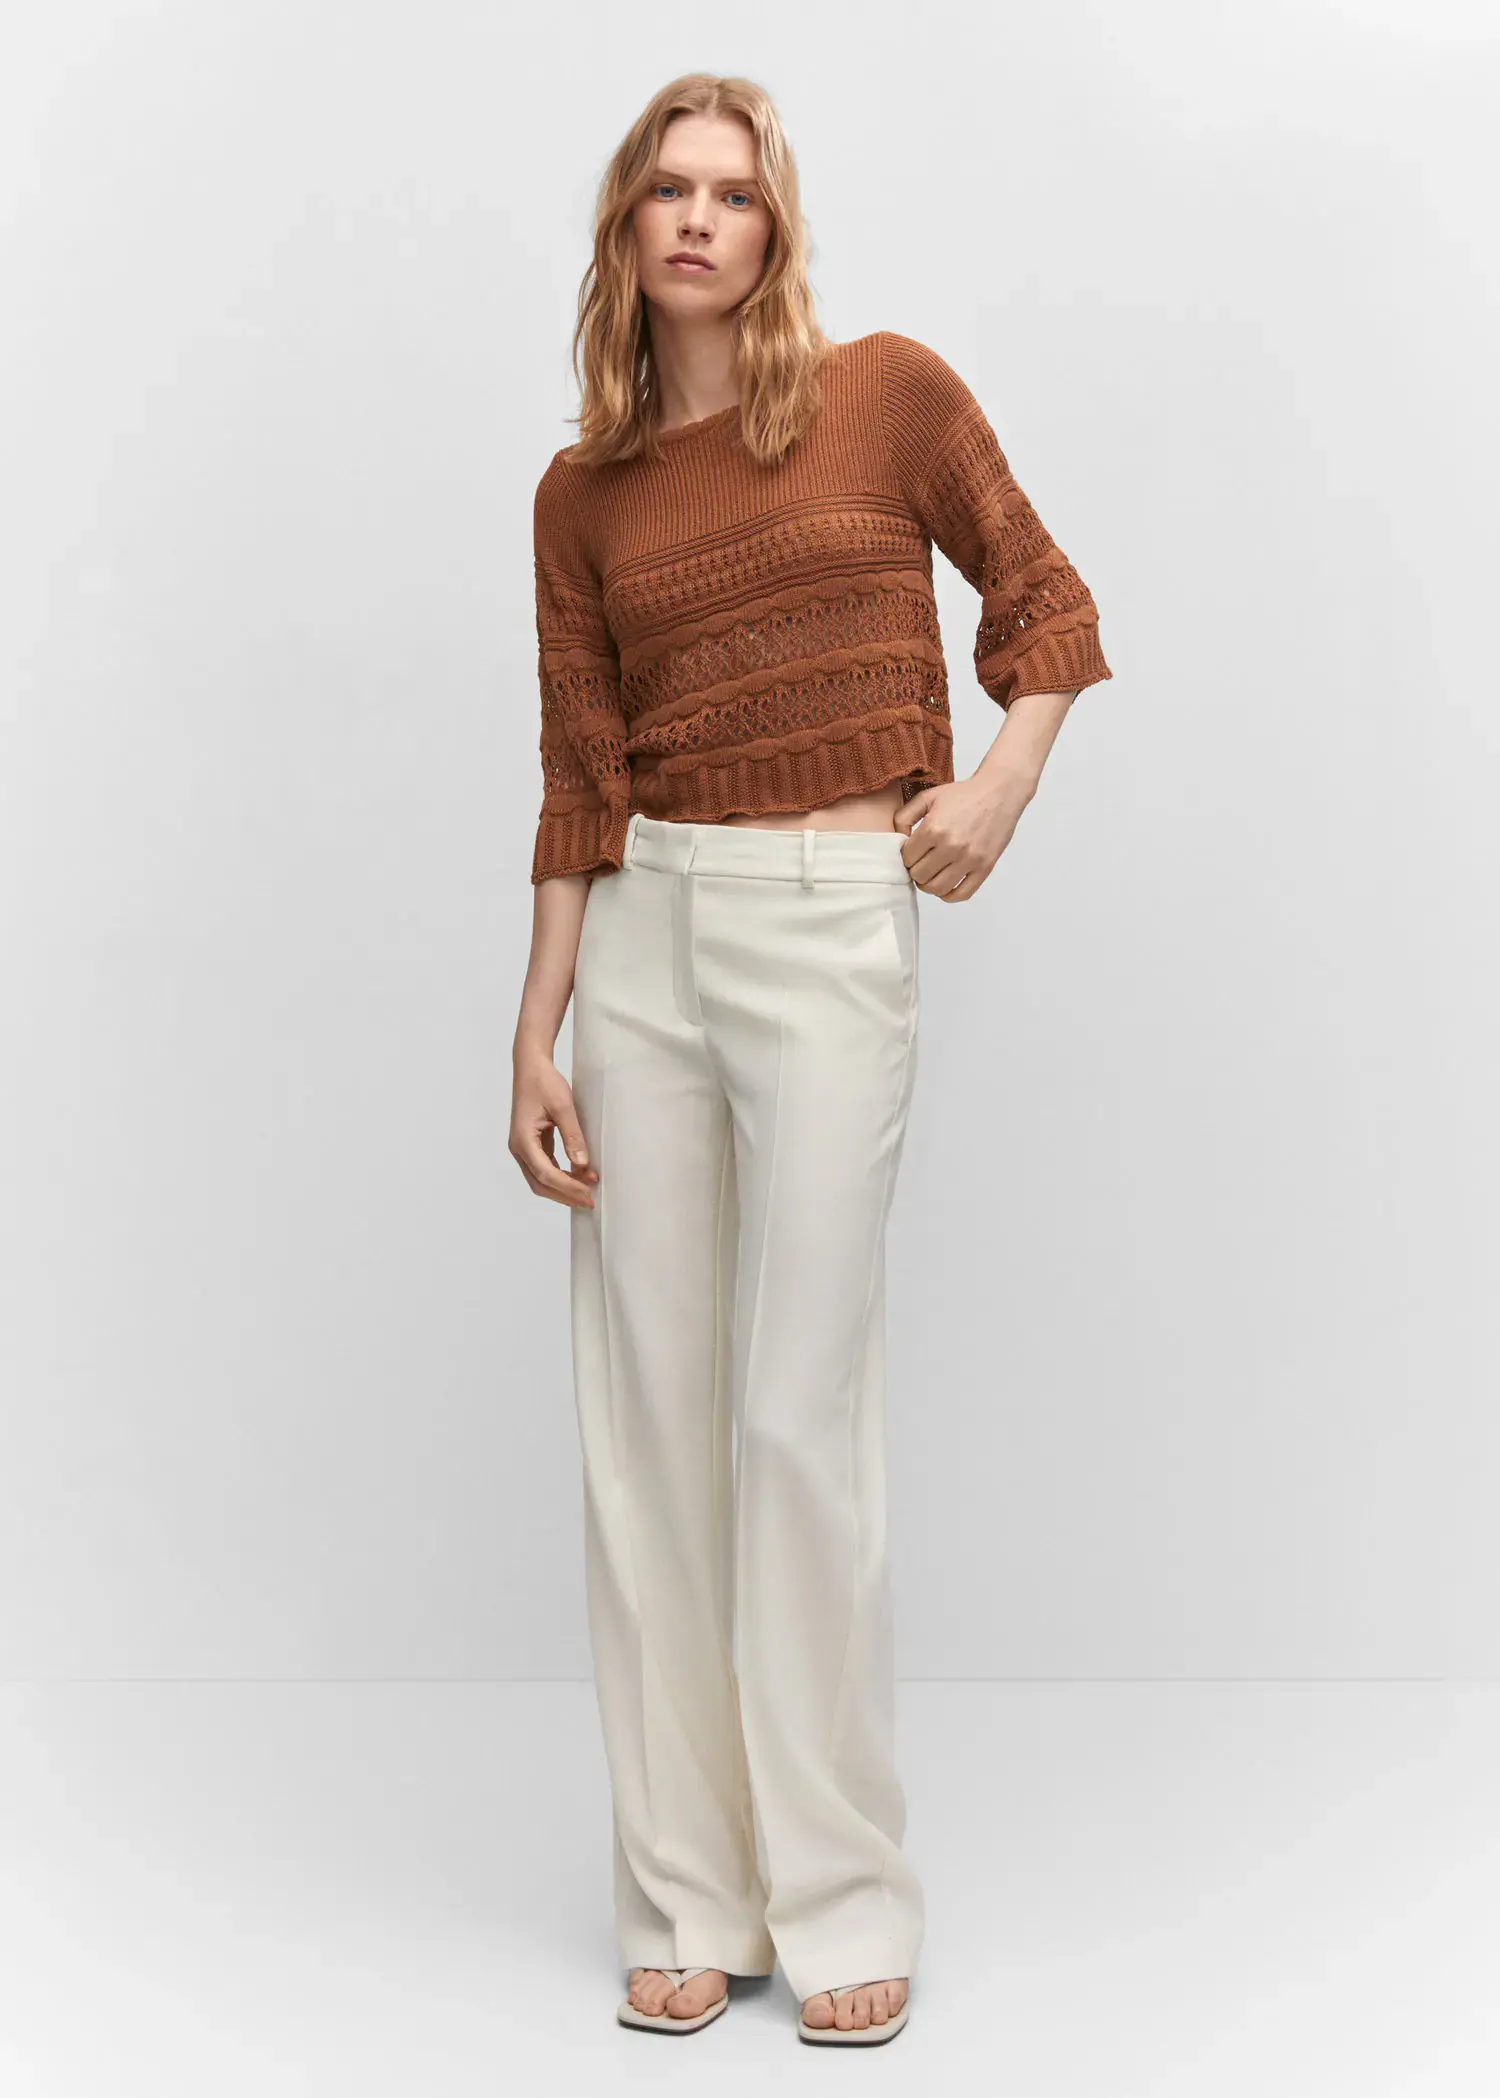 Mango Openwork sweater with flared sleeves. a woman standing in front of a white background. 